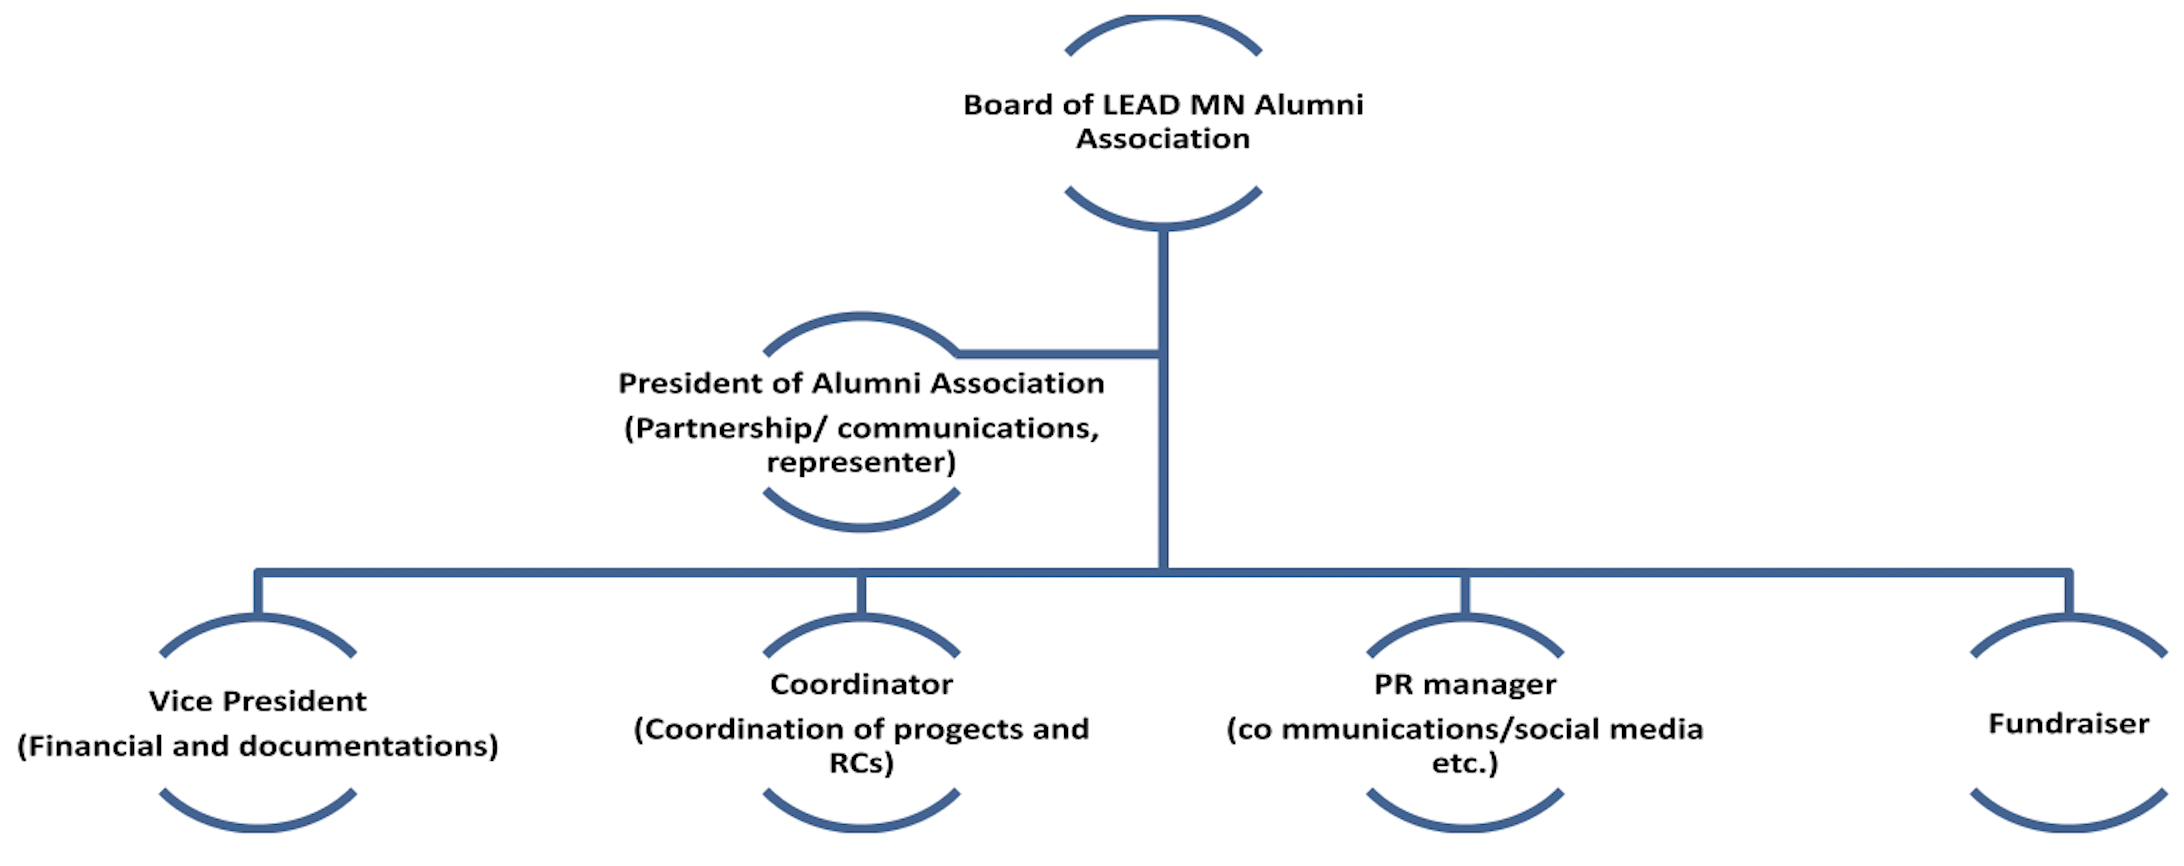 flow chart of Alumni Association leadership structure. The flow chart includes President, Vice President, Coordinator, PR Manager, and Fundraiser